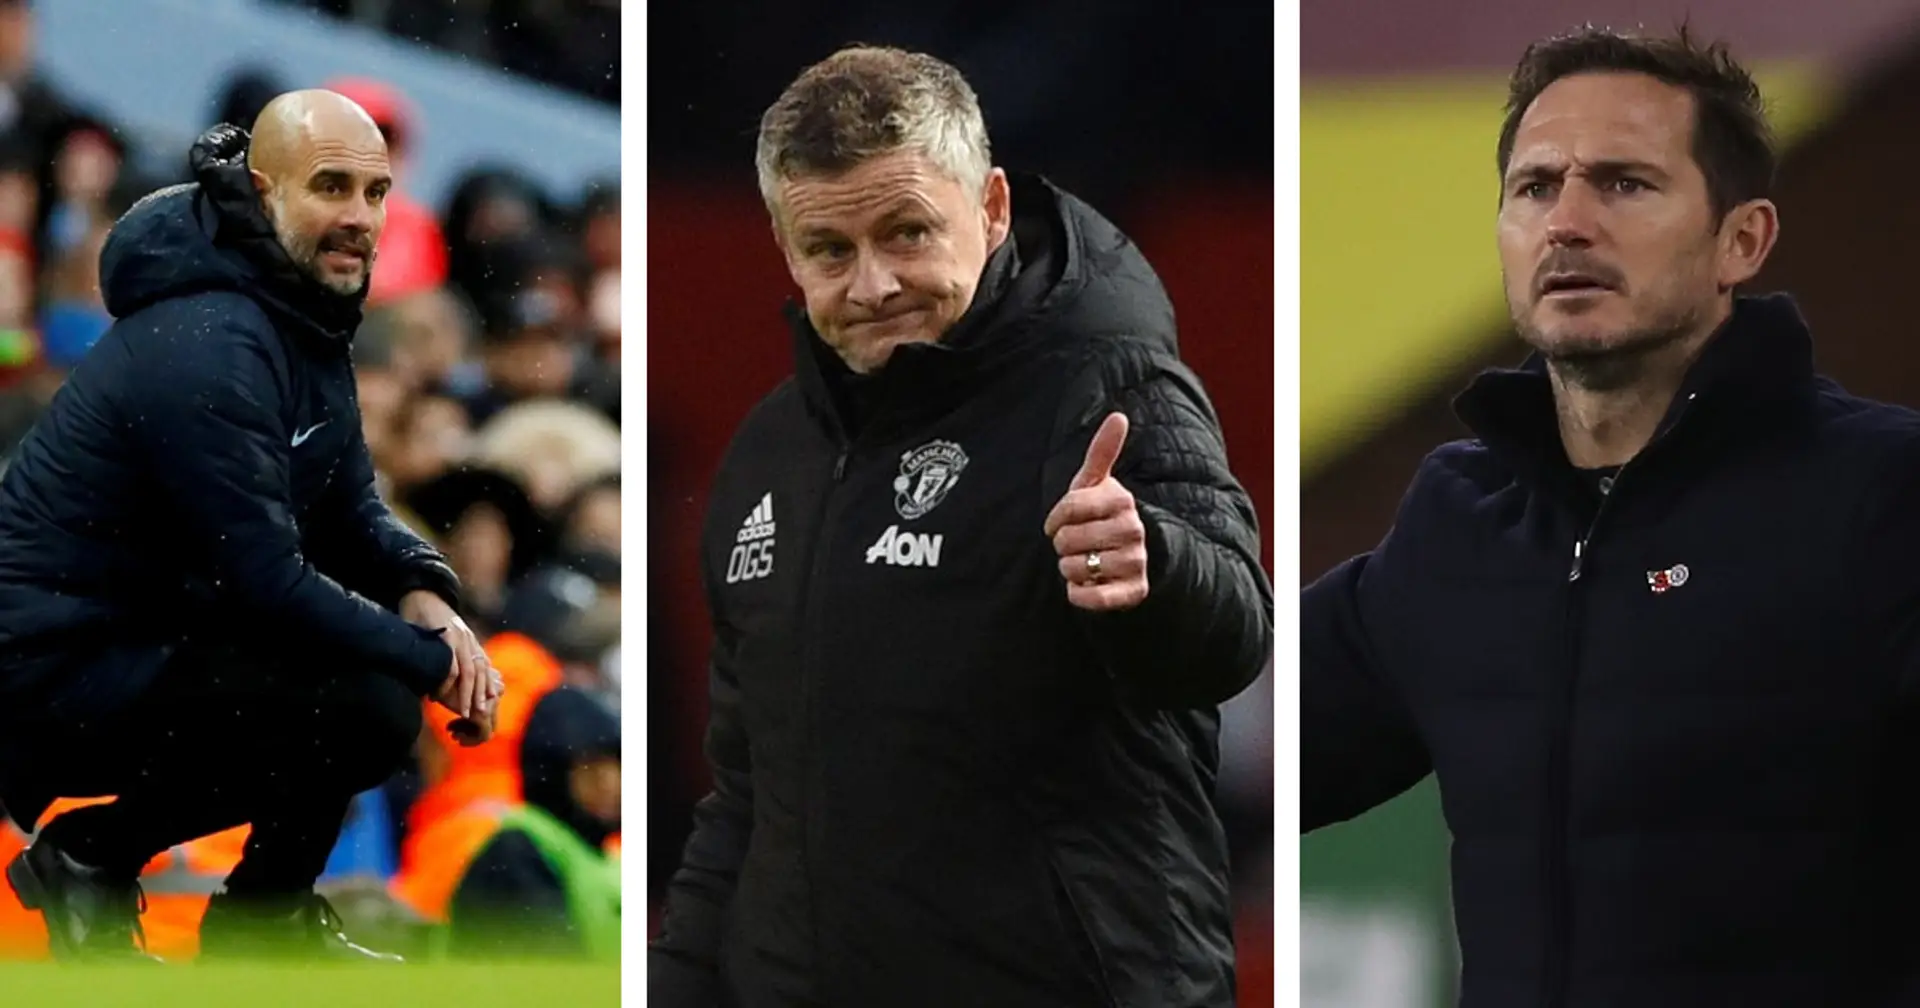 Man City & Chelsea drop points, Spurs play Liverpool: What it could mean for Man United if we beat rock-bottom Sheffield 